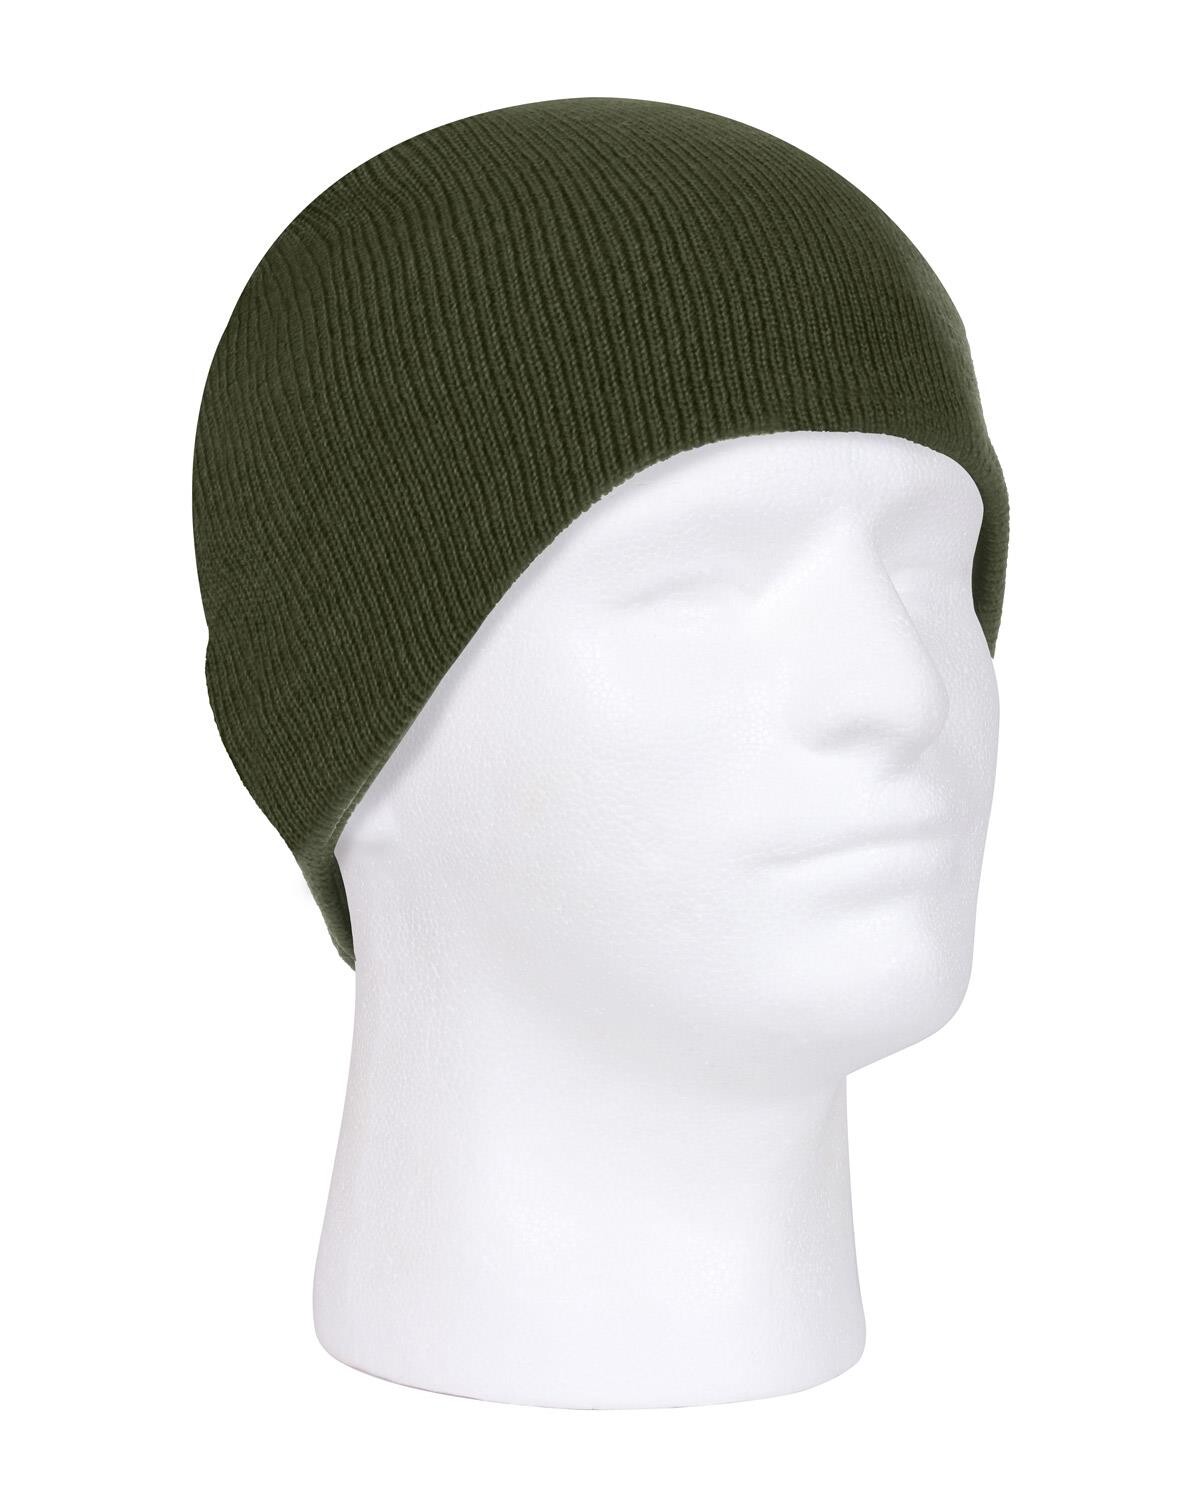 #3 - Rothco Beanie (Oliven, One Size)